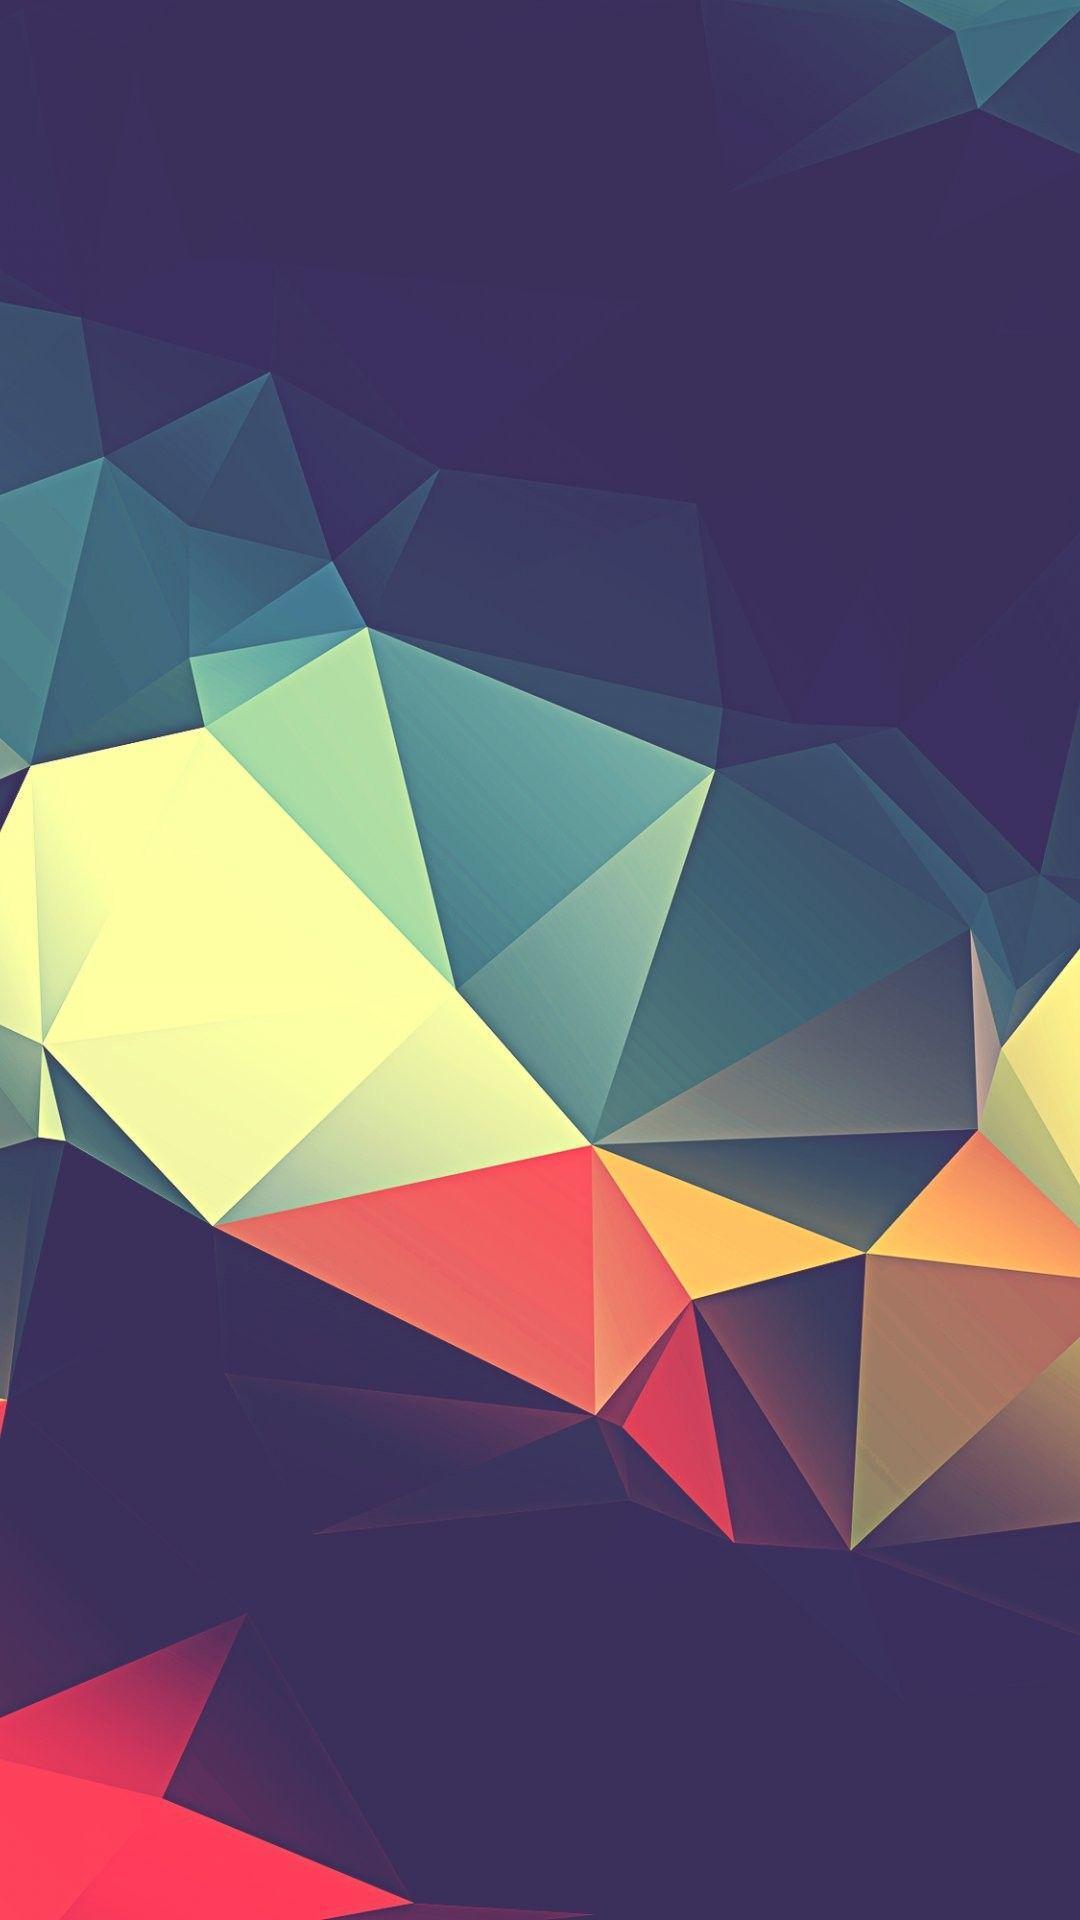 Low poly. HTC One wallpaper